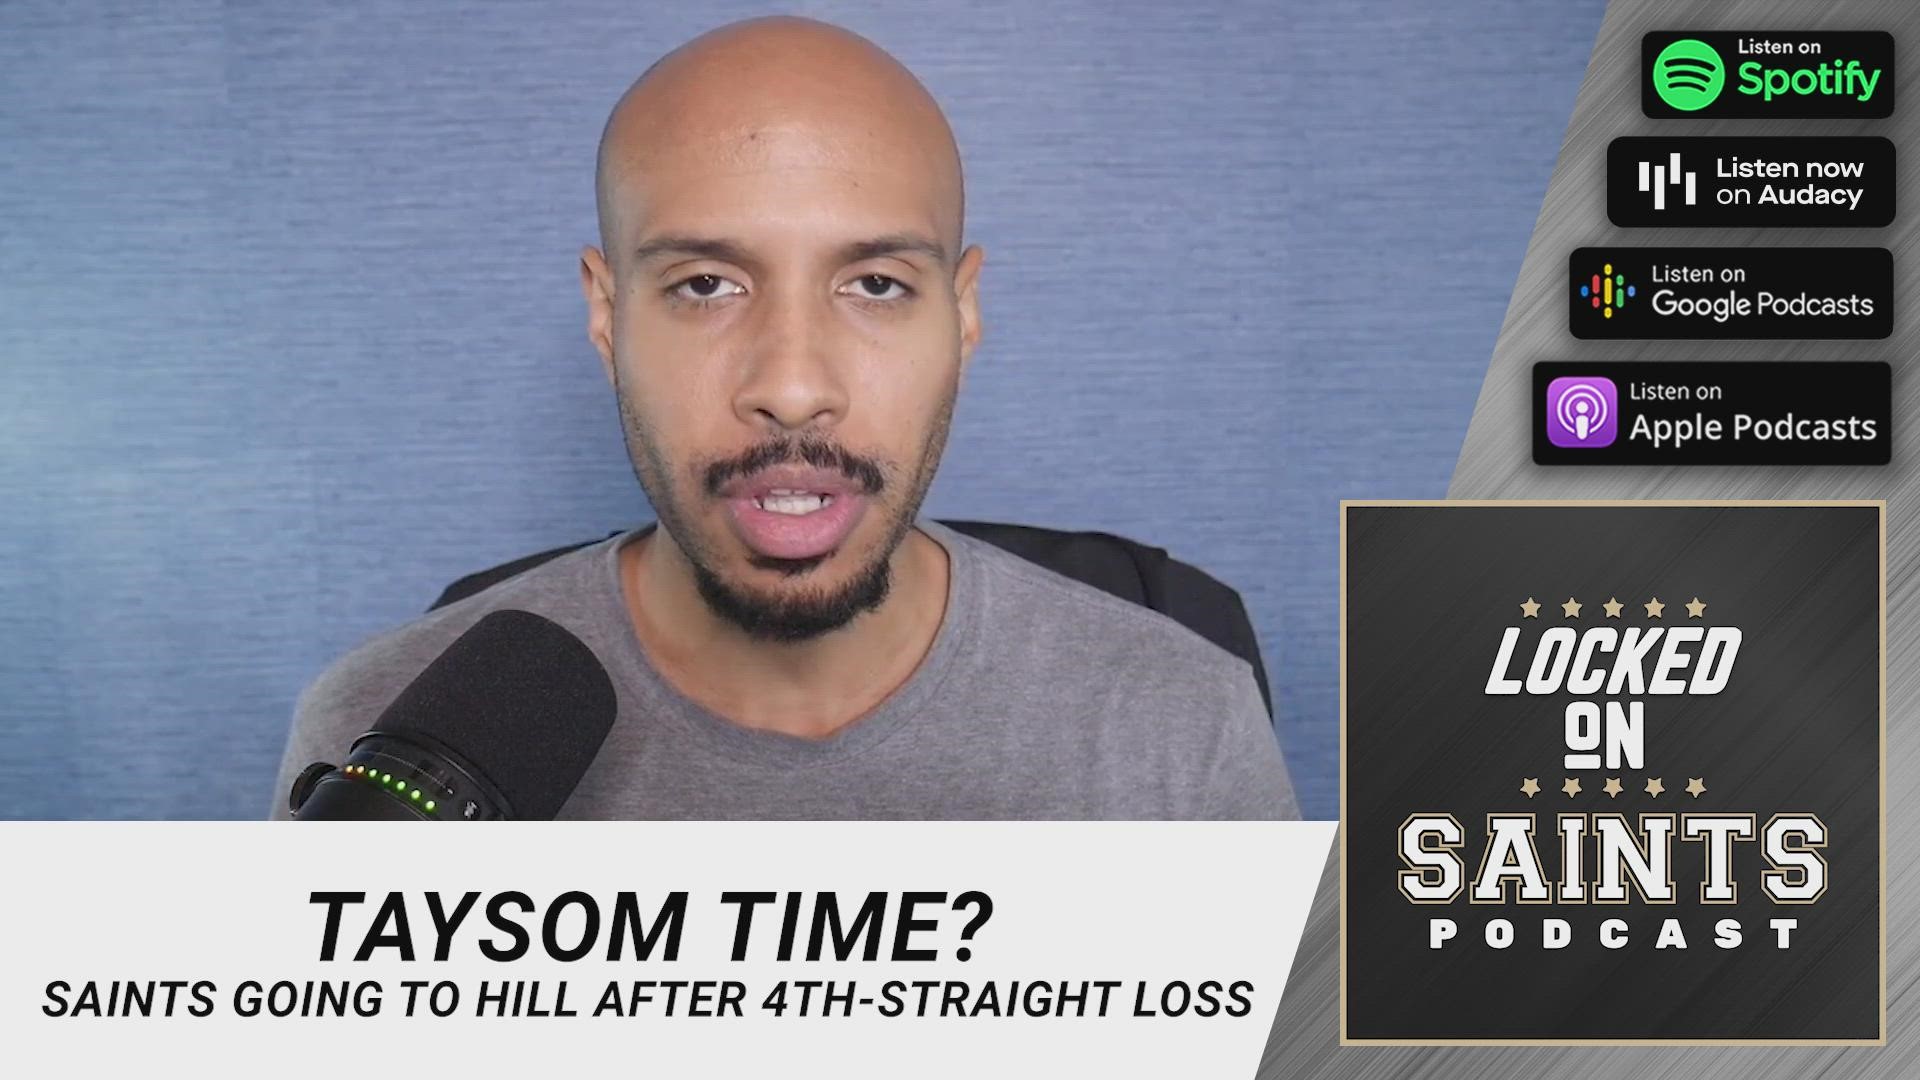 Locked On's Ross Jackson shares his thoughts on Taysom Hill likely getting the start against the Cowboys Thursday night.